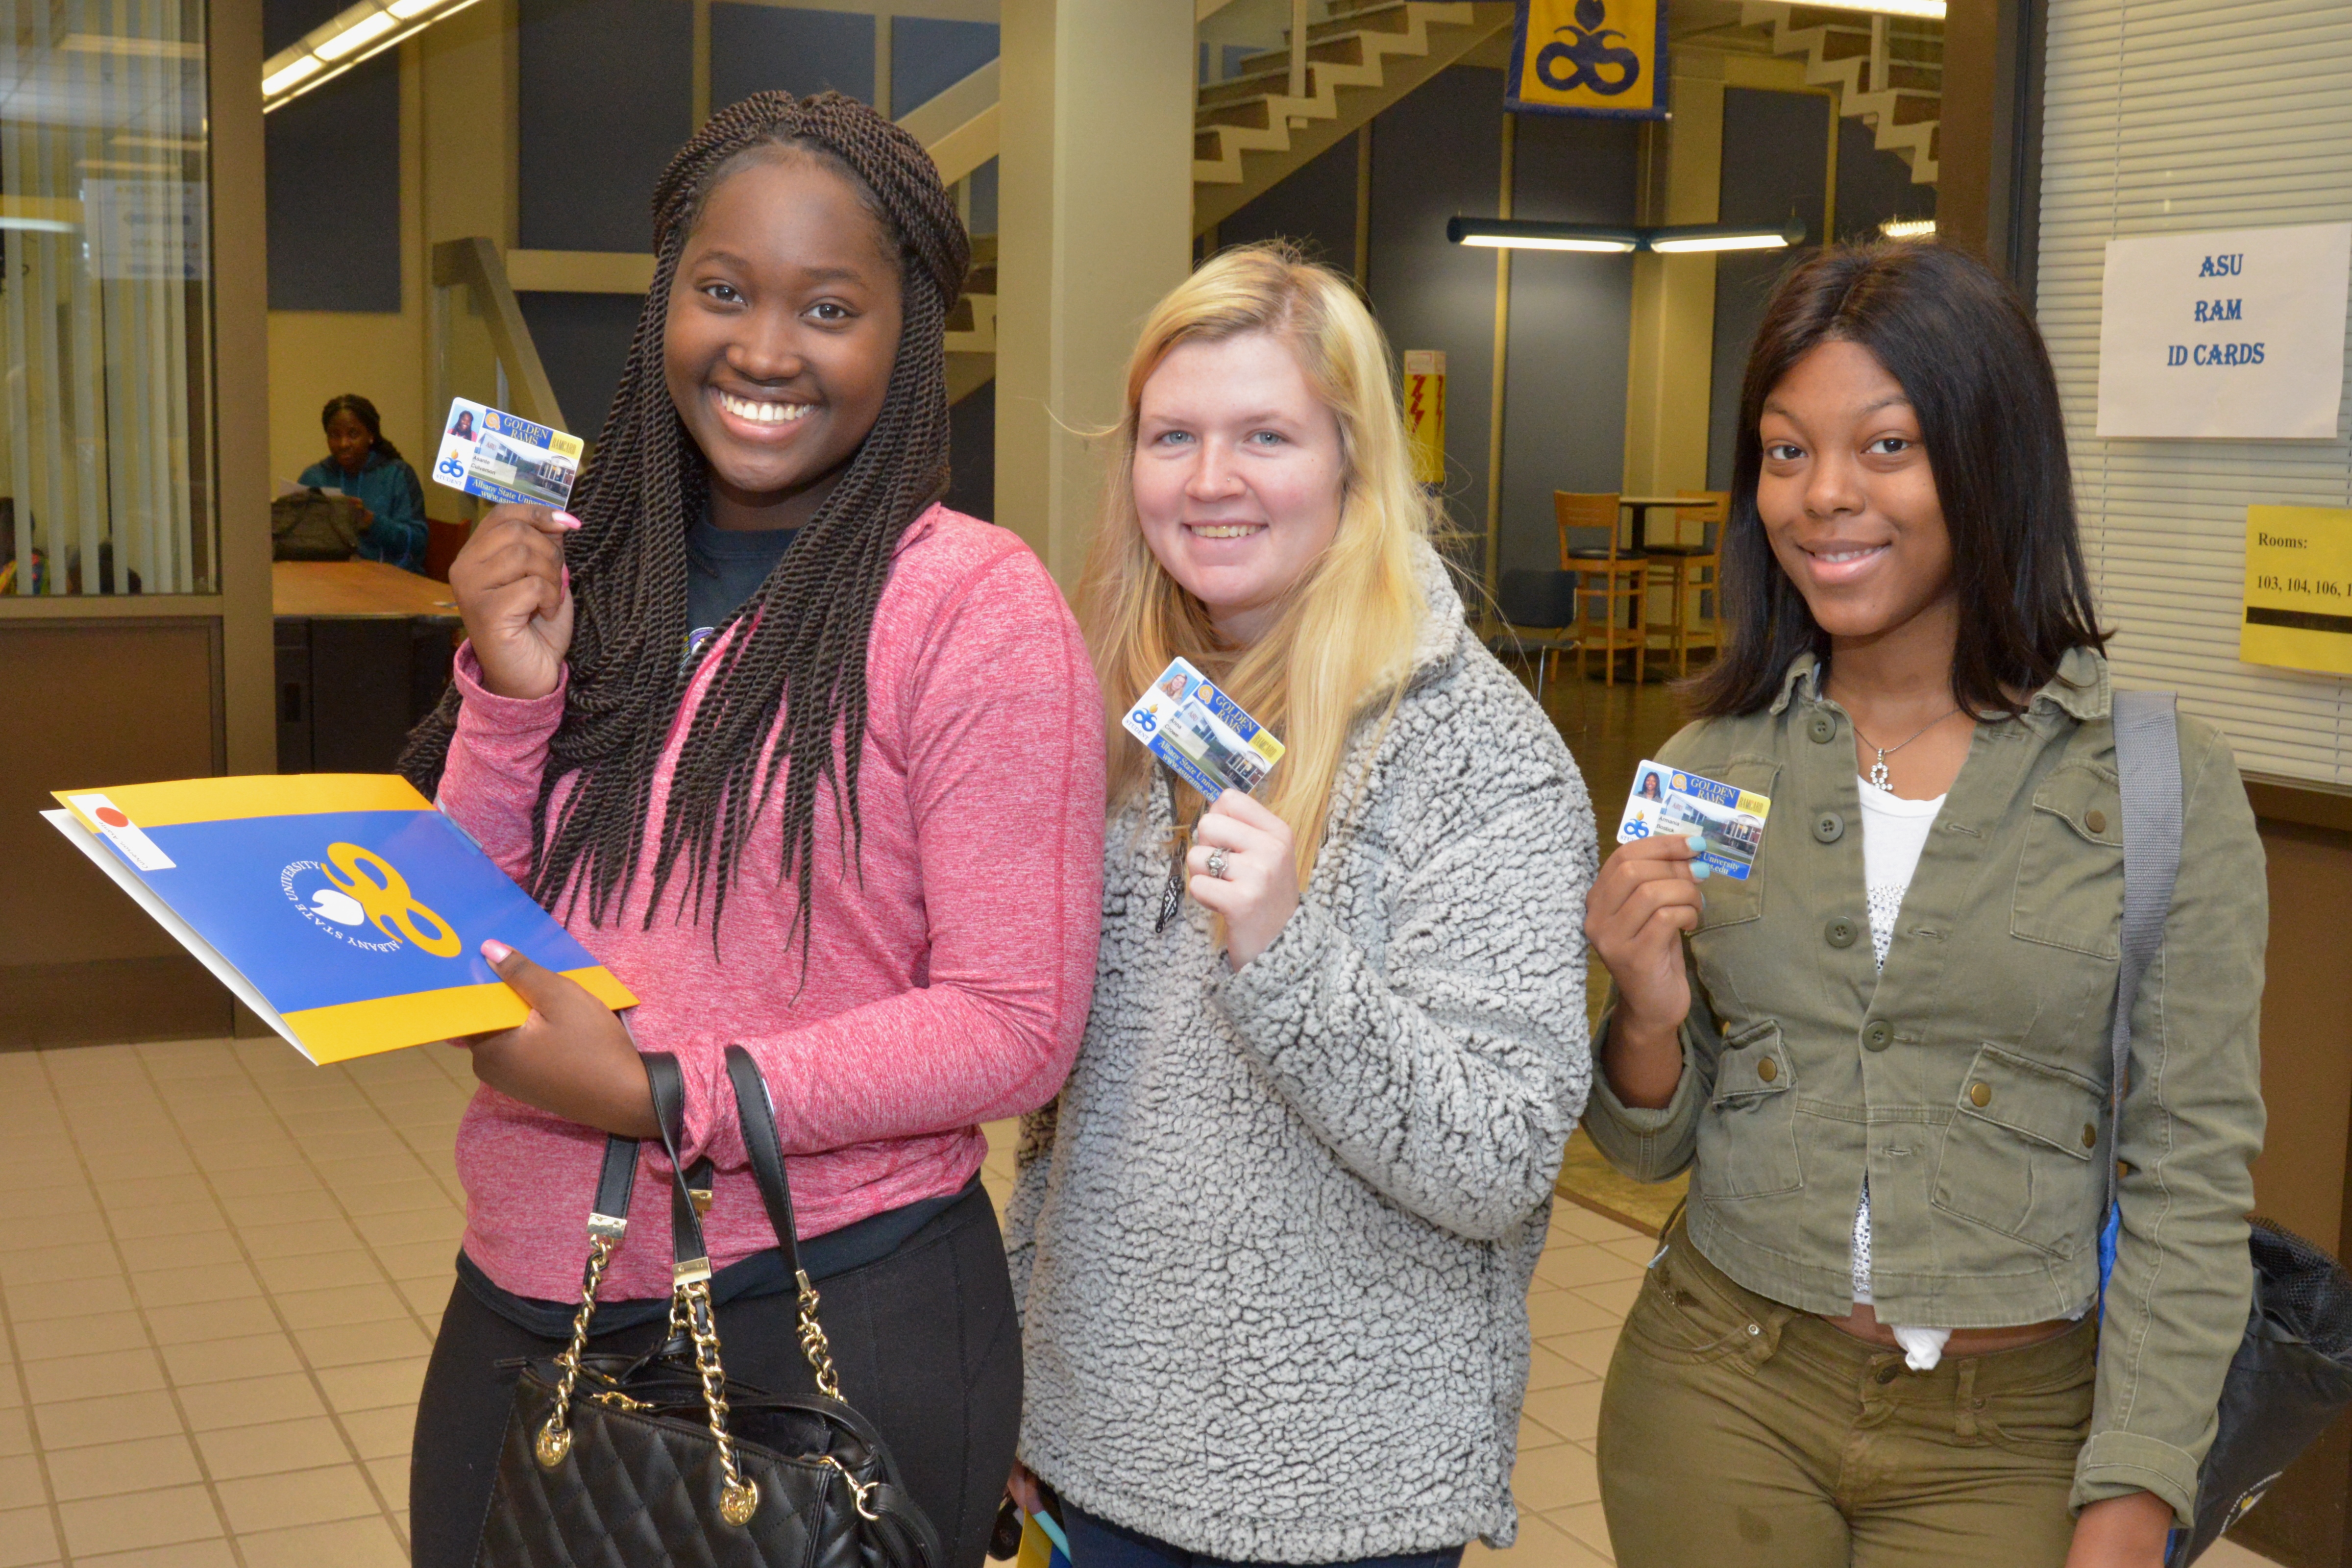 students smiling holding ID cards